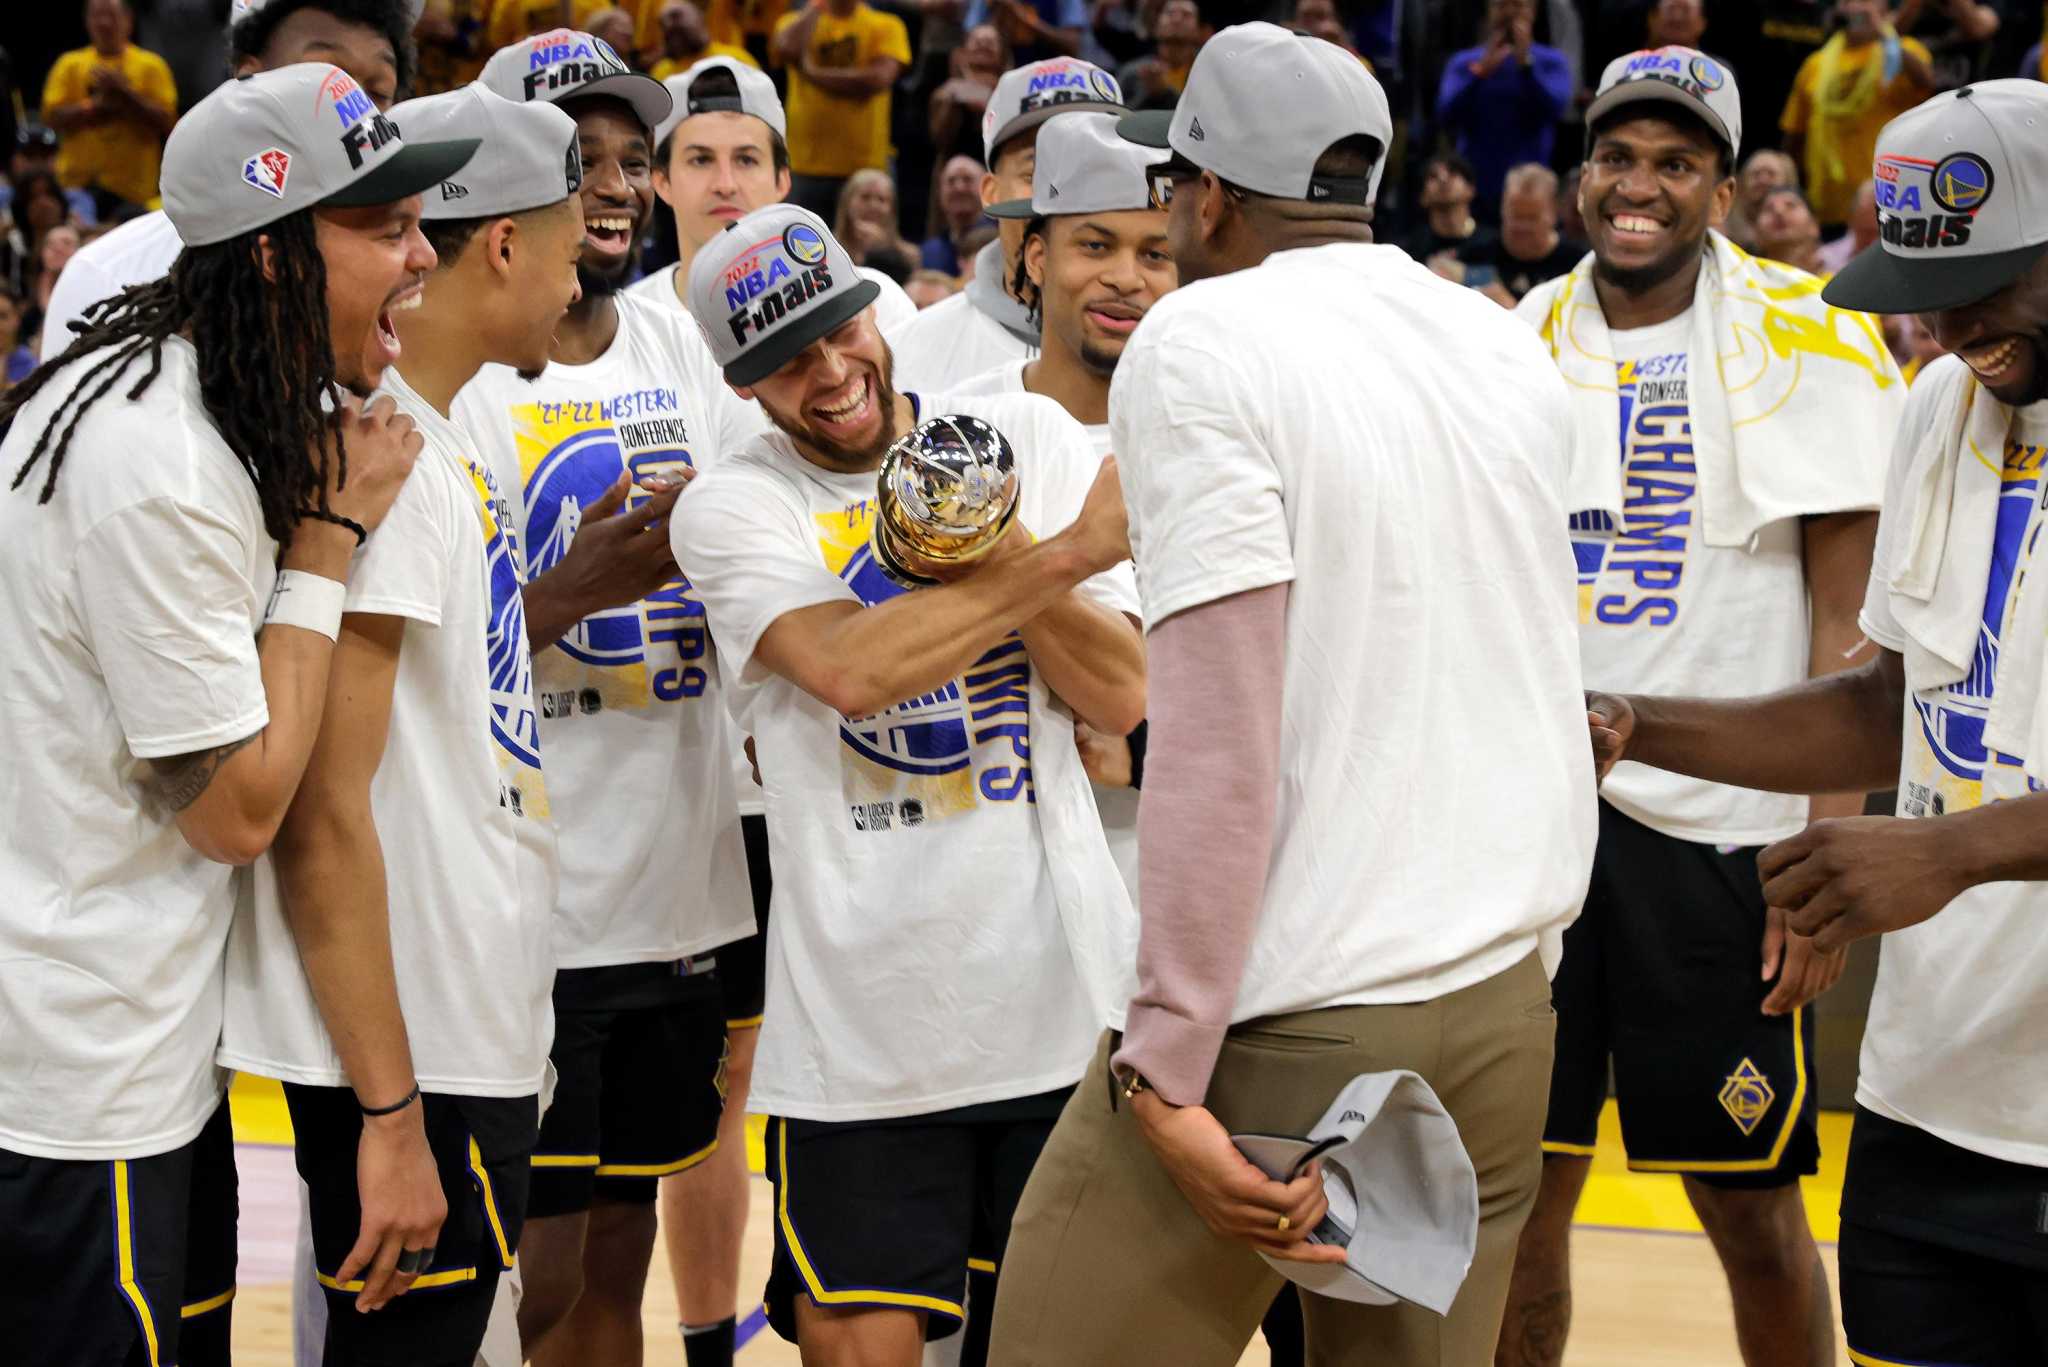 Phoenix Suns NBA Finals shirts, hats: How to shop for Western Conference  championship gear 